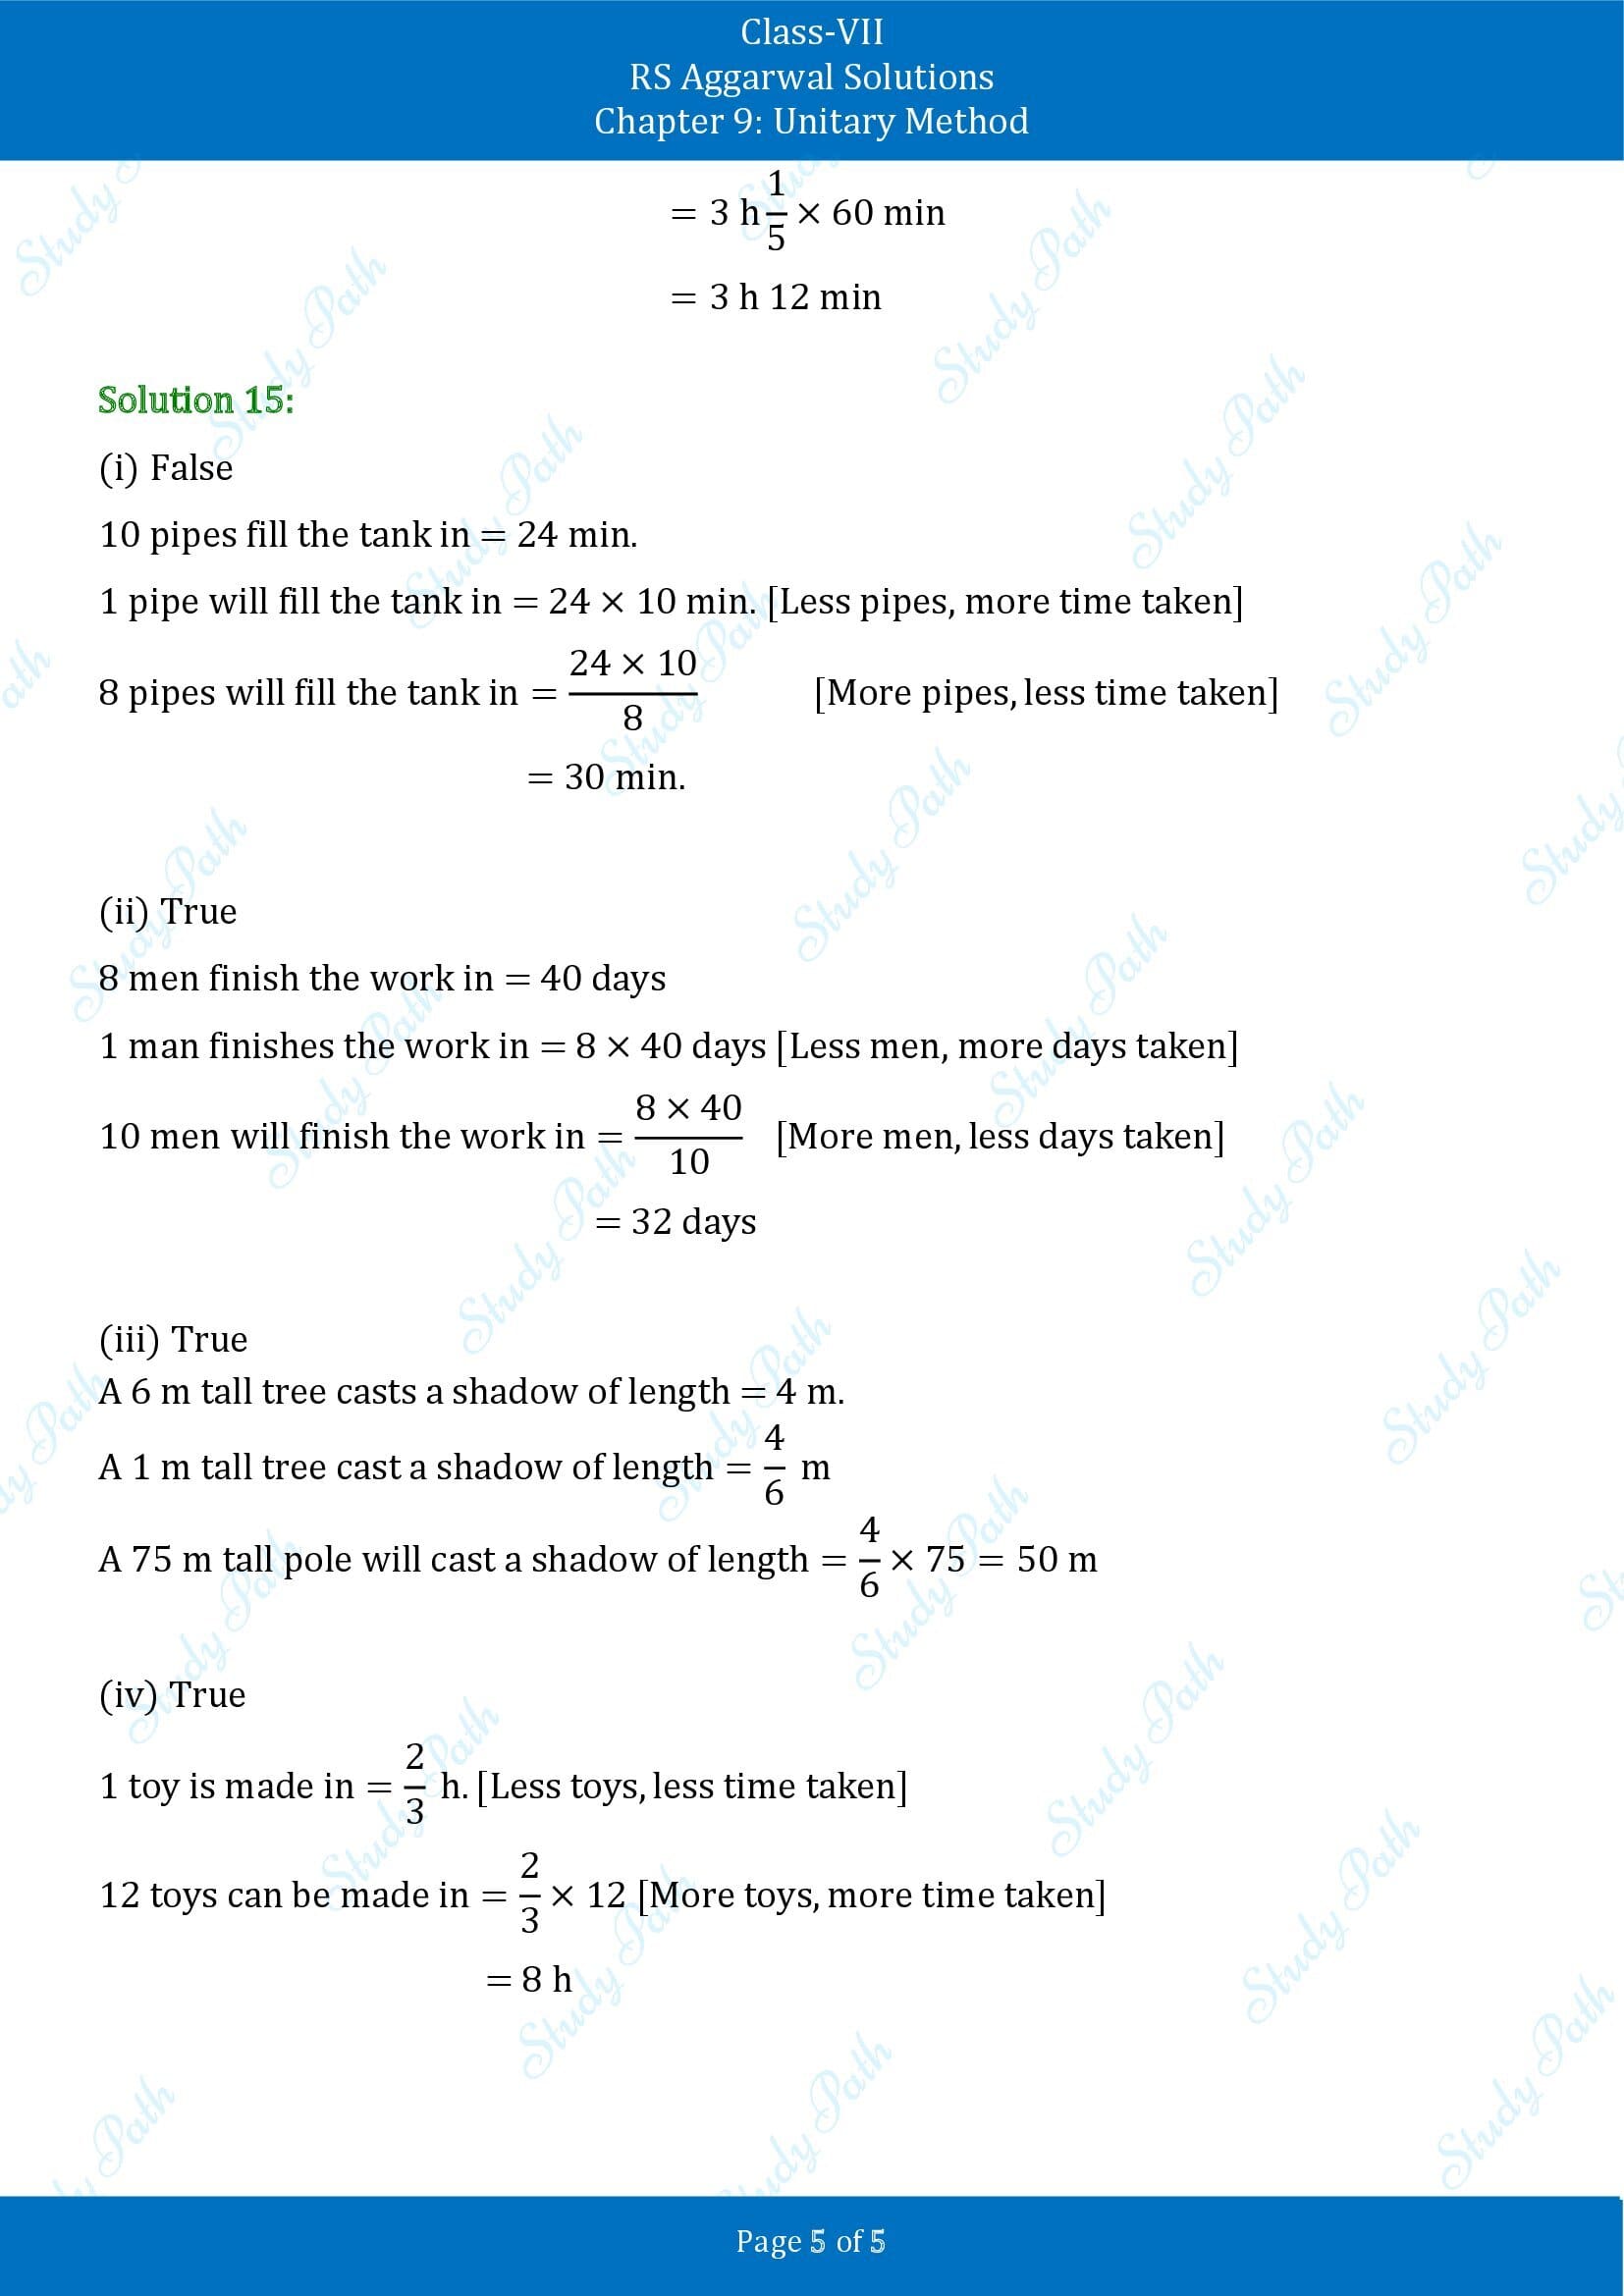 RS Aggarwal Solutions Class 7 Chapter 9 Unitary Method Test Paper 00005